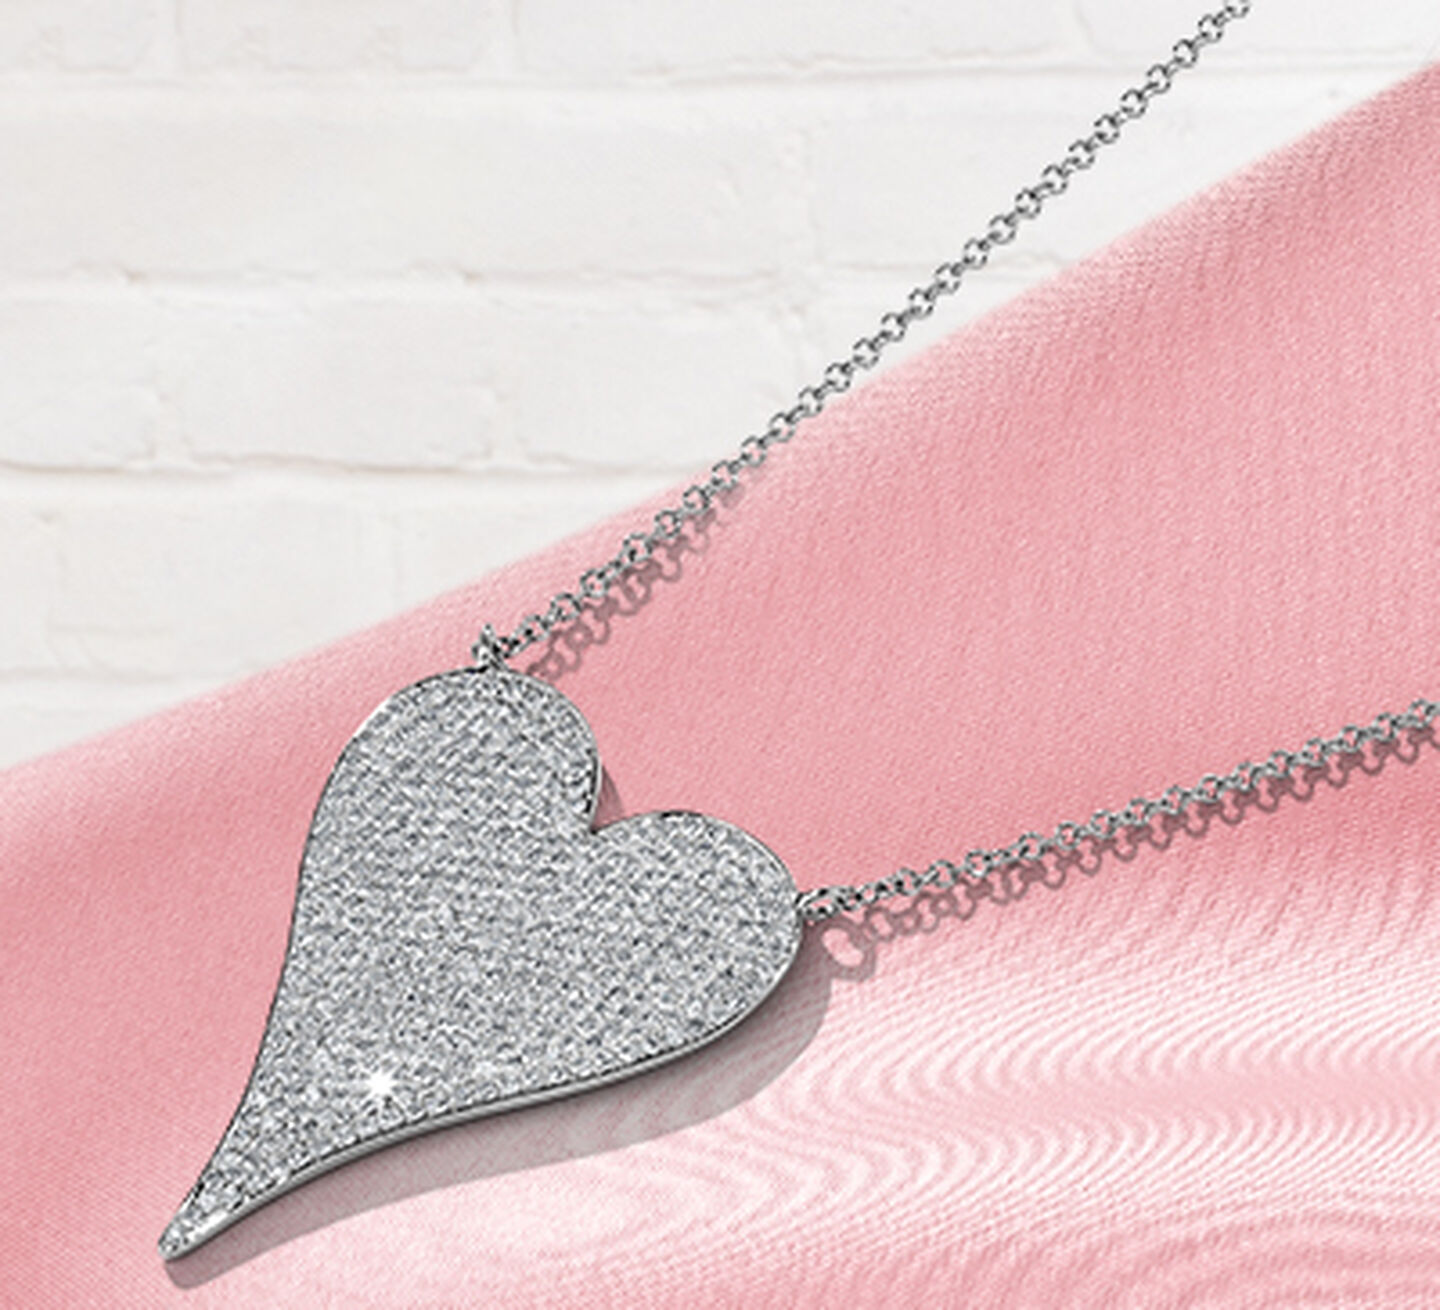 Shy Heart Necklace with pave diamonds in pink satin background